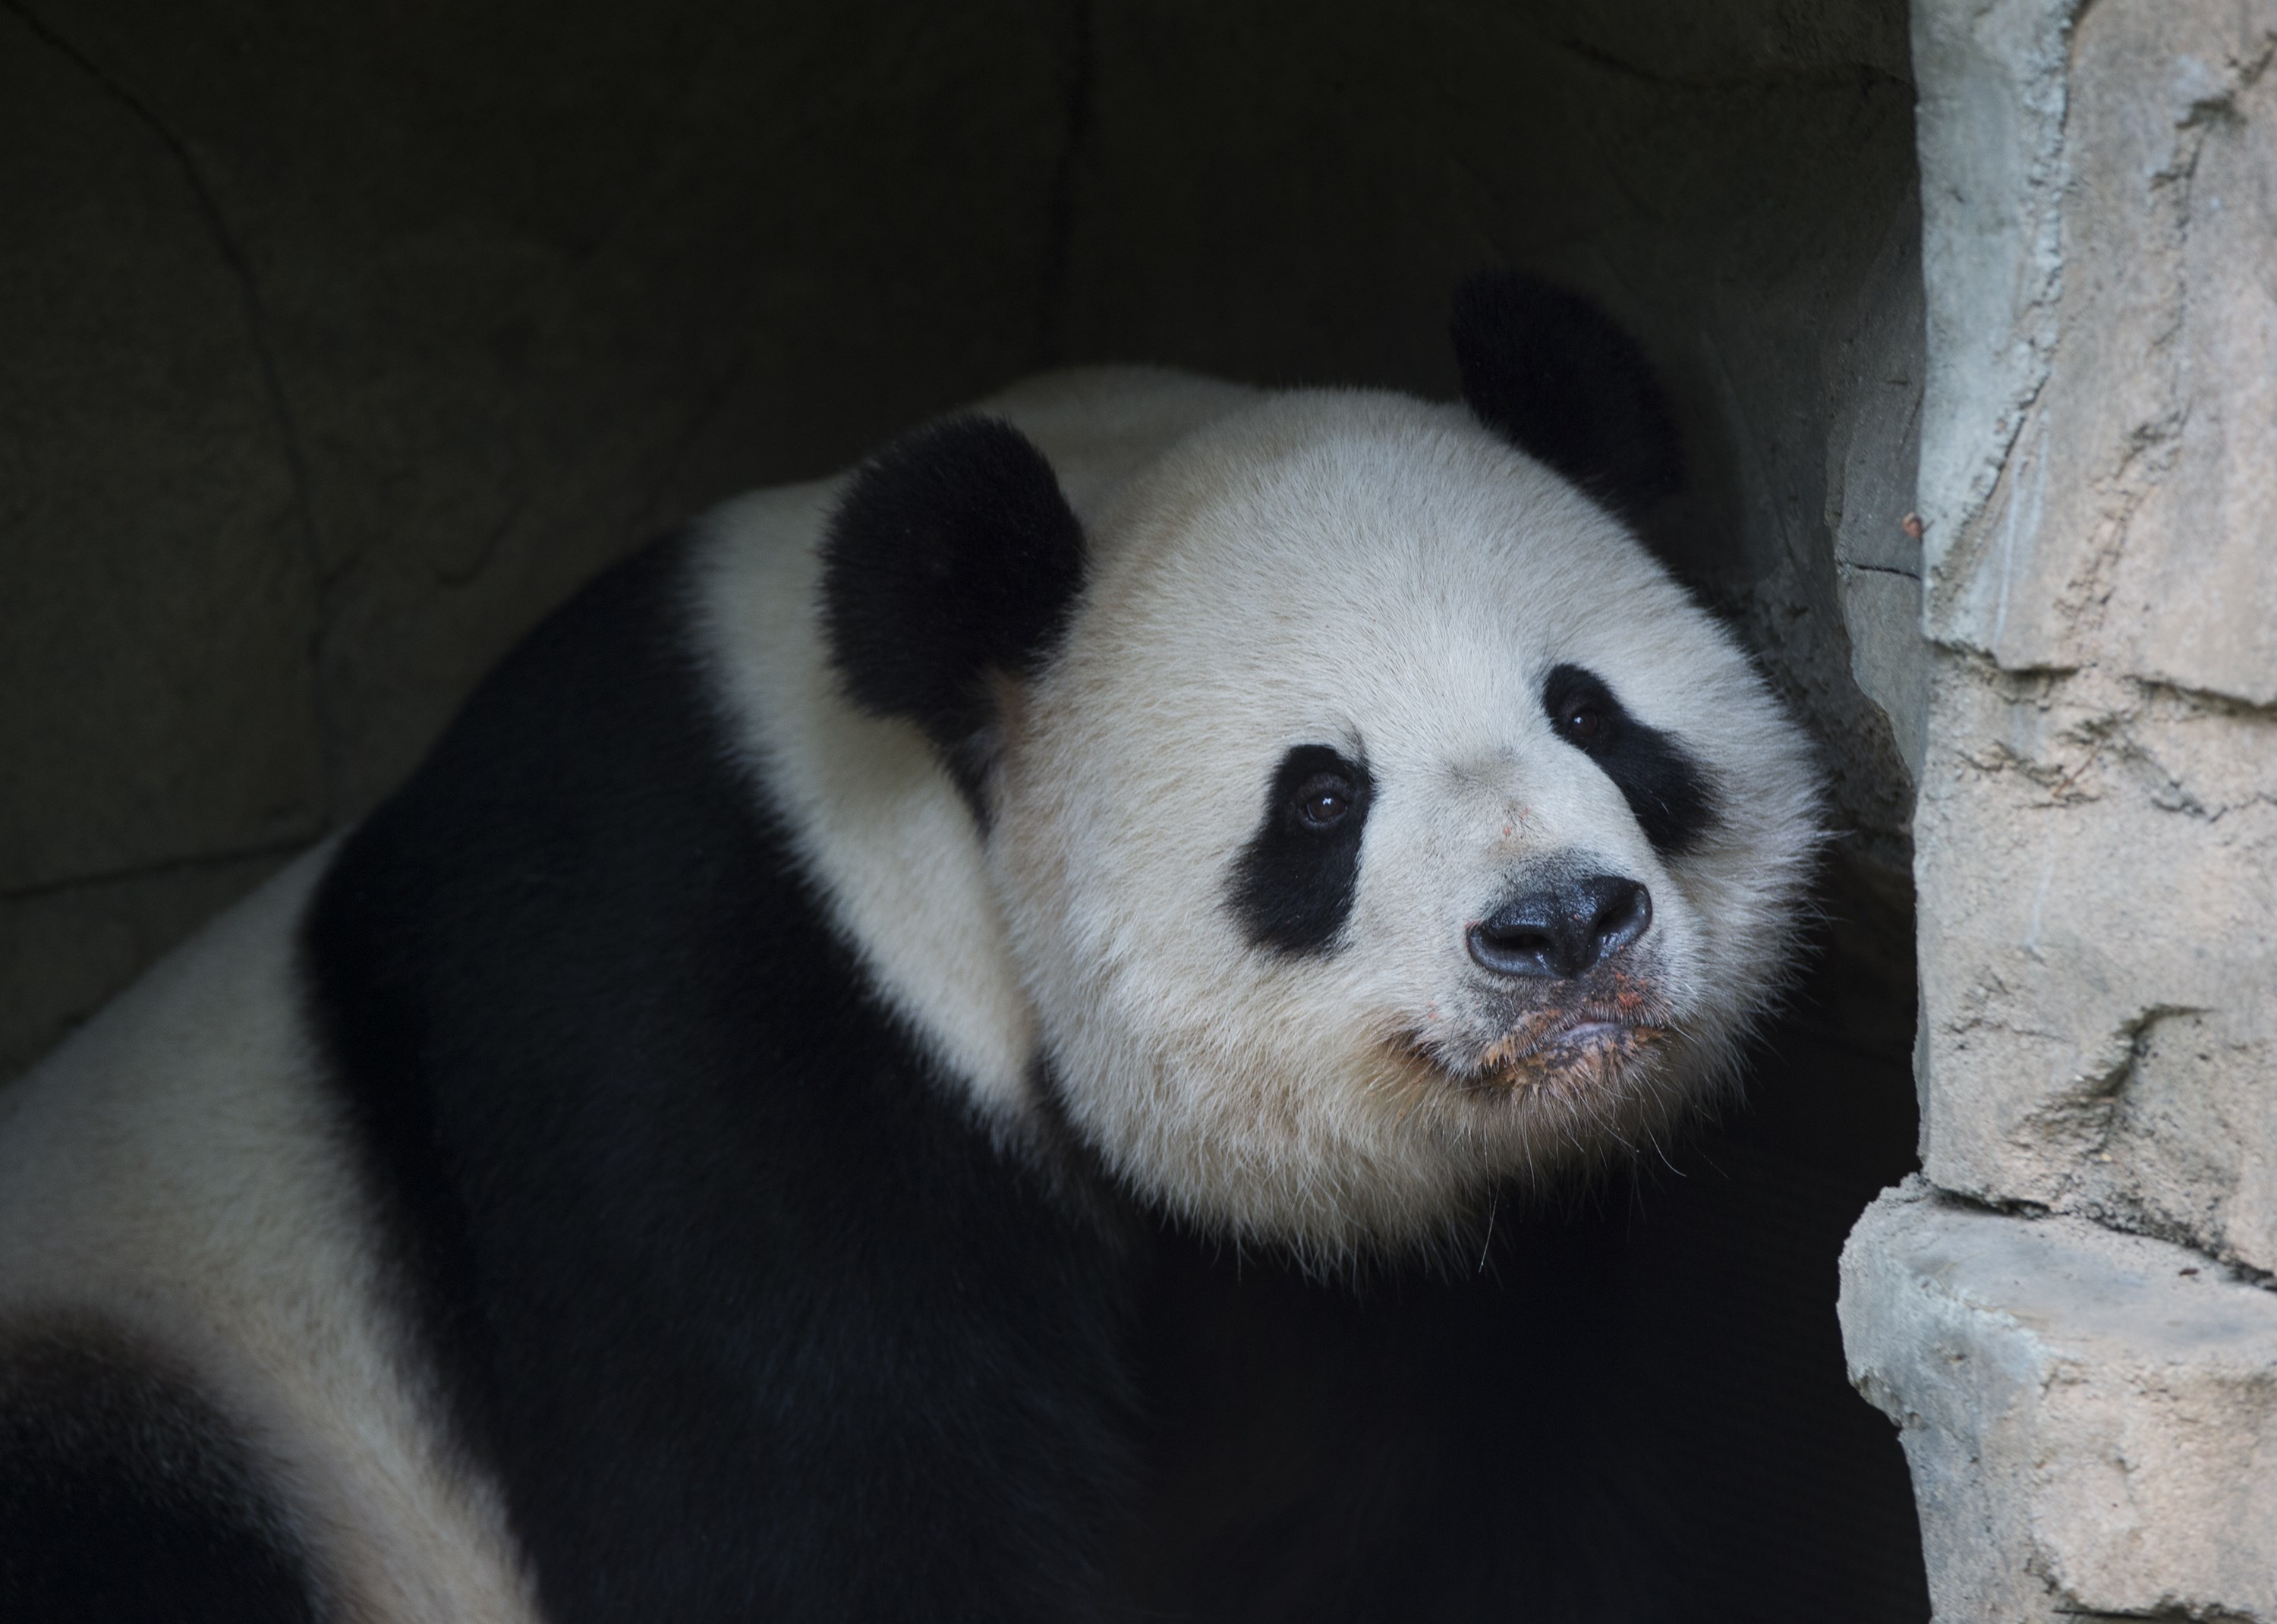 Giant Panda Tian Tian rests at the Smithsonian National Zoo on Sept. 25, 2015 in Washington, DC. (Molly Riley—AFP/Getty Images)